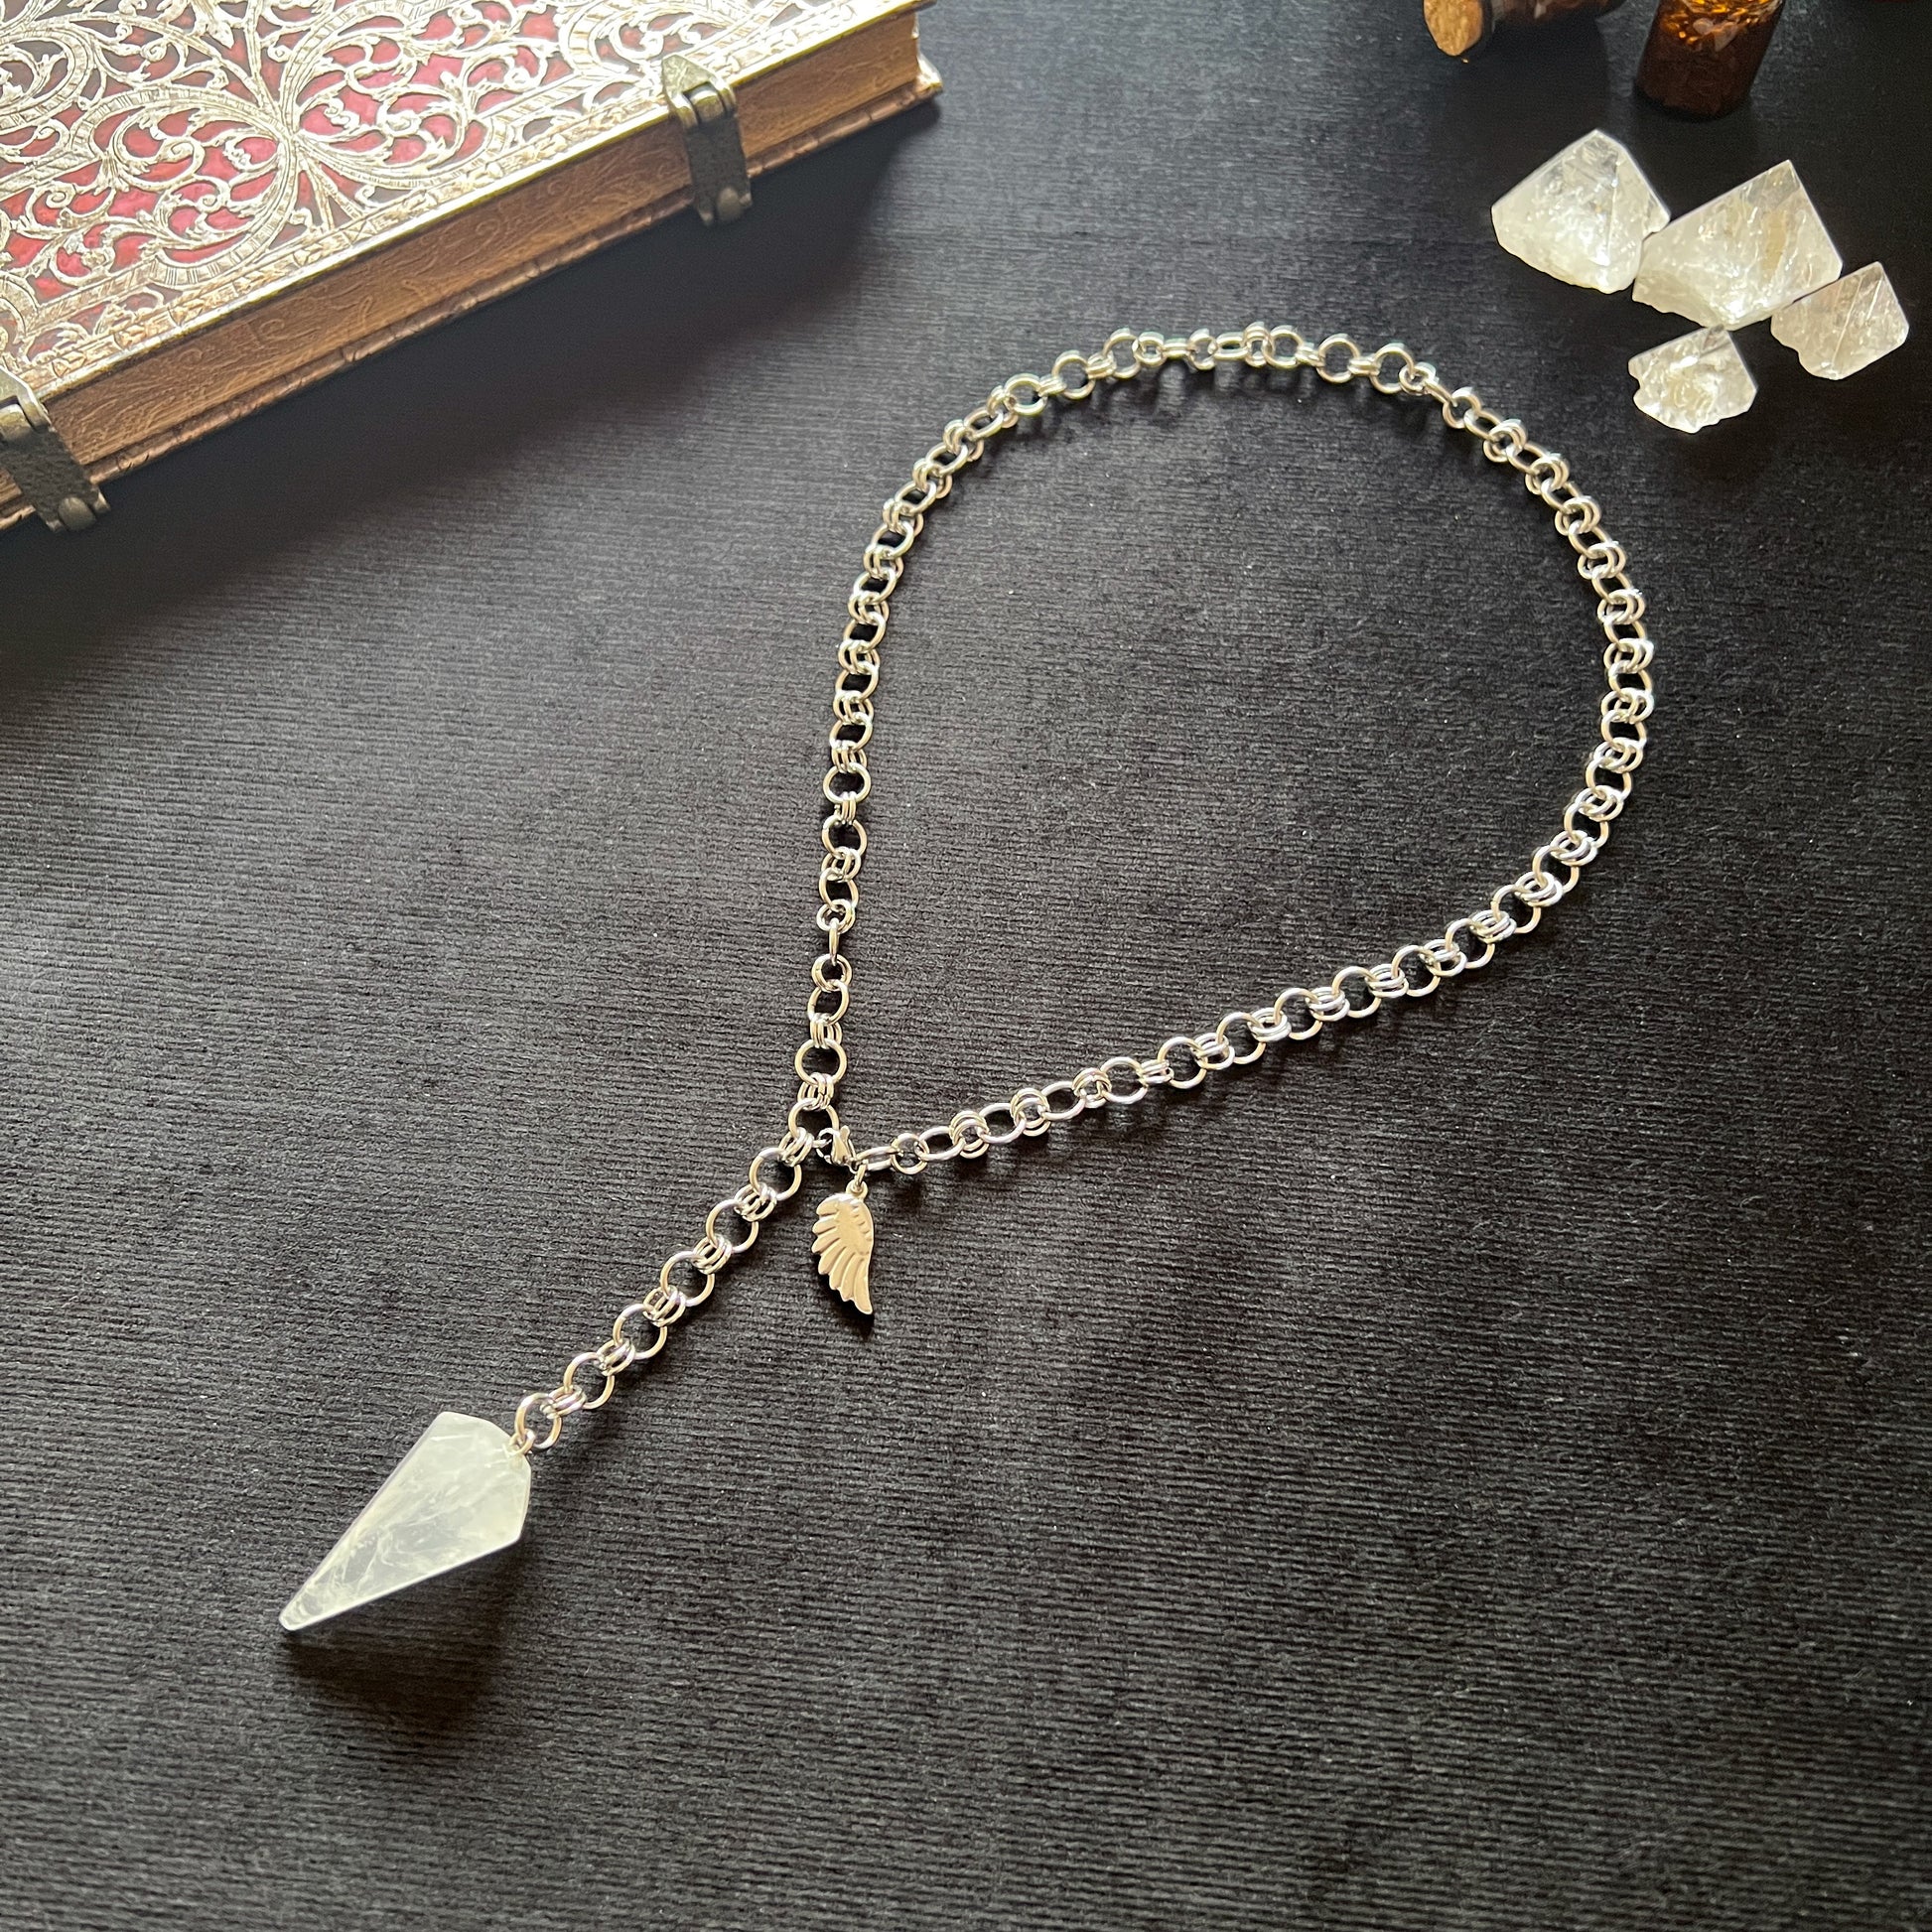 Clear Quartz Pendulum Necklace with Stainless Steel Chain for Witchcraft, Dowsing, Energy Healing, gemstone divination tool and jewelry